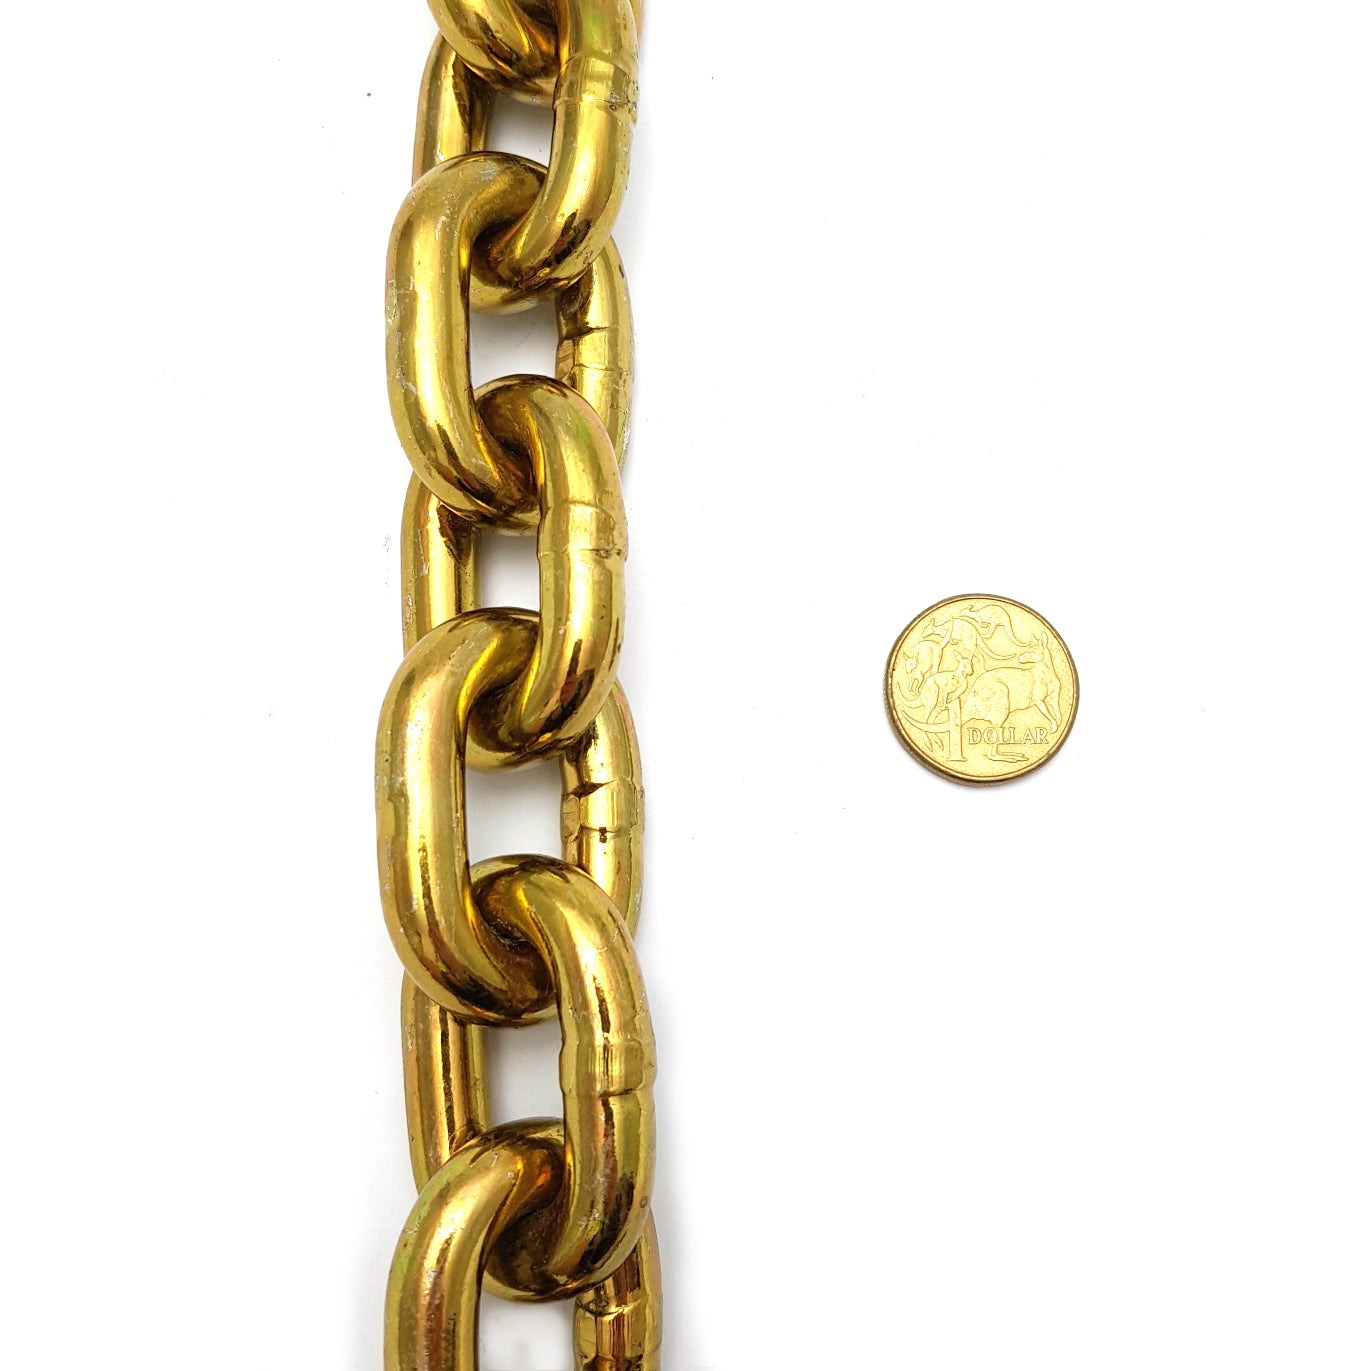 Hardened security chain, size: 10mm, order by the metre with a minimum order of 1 metre.